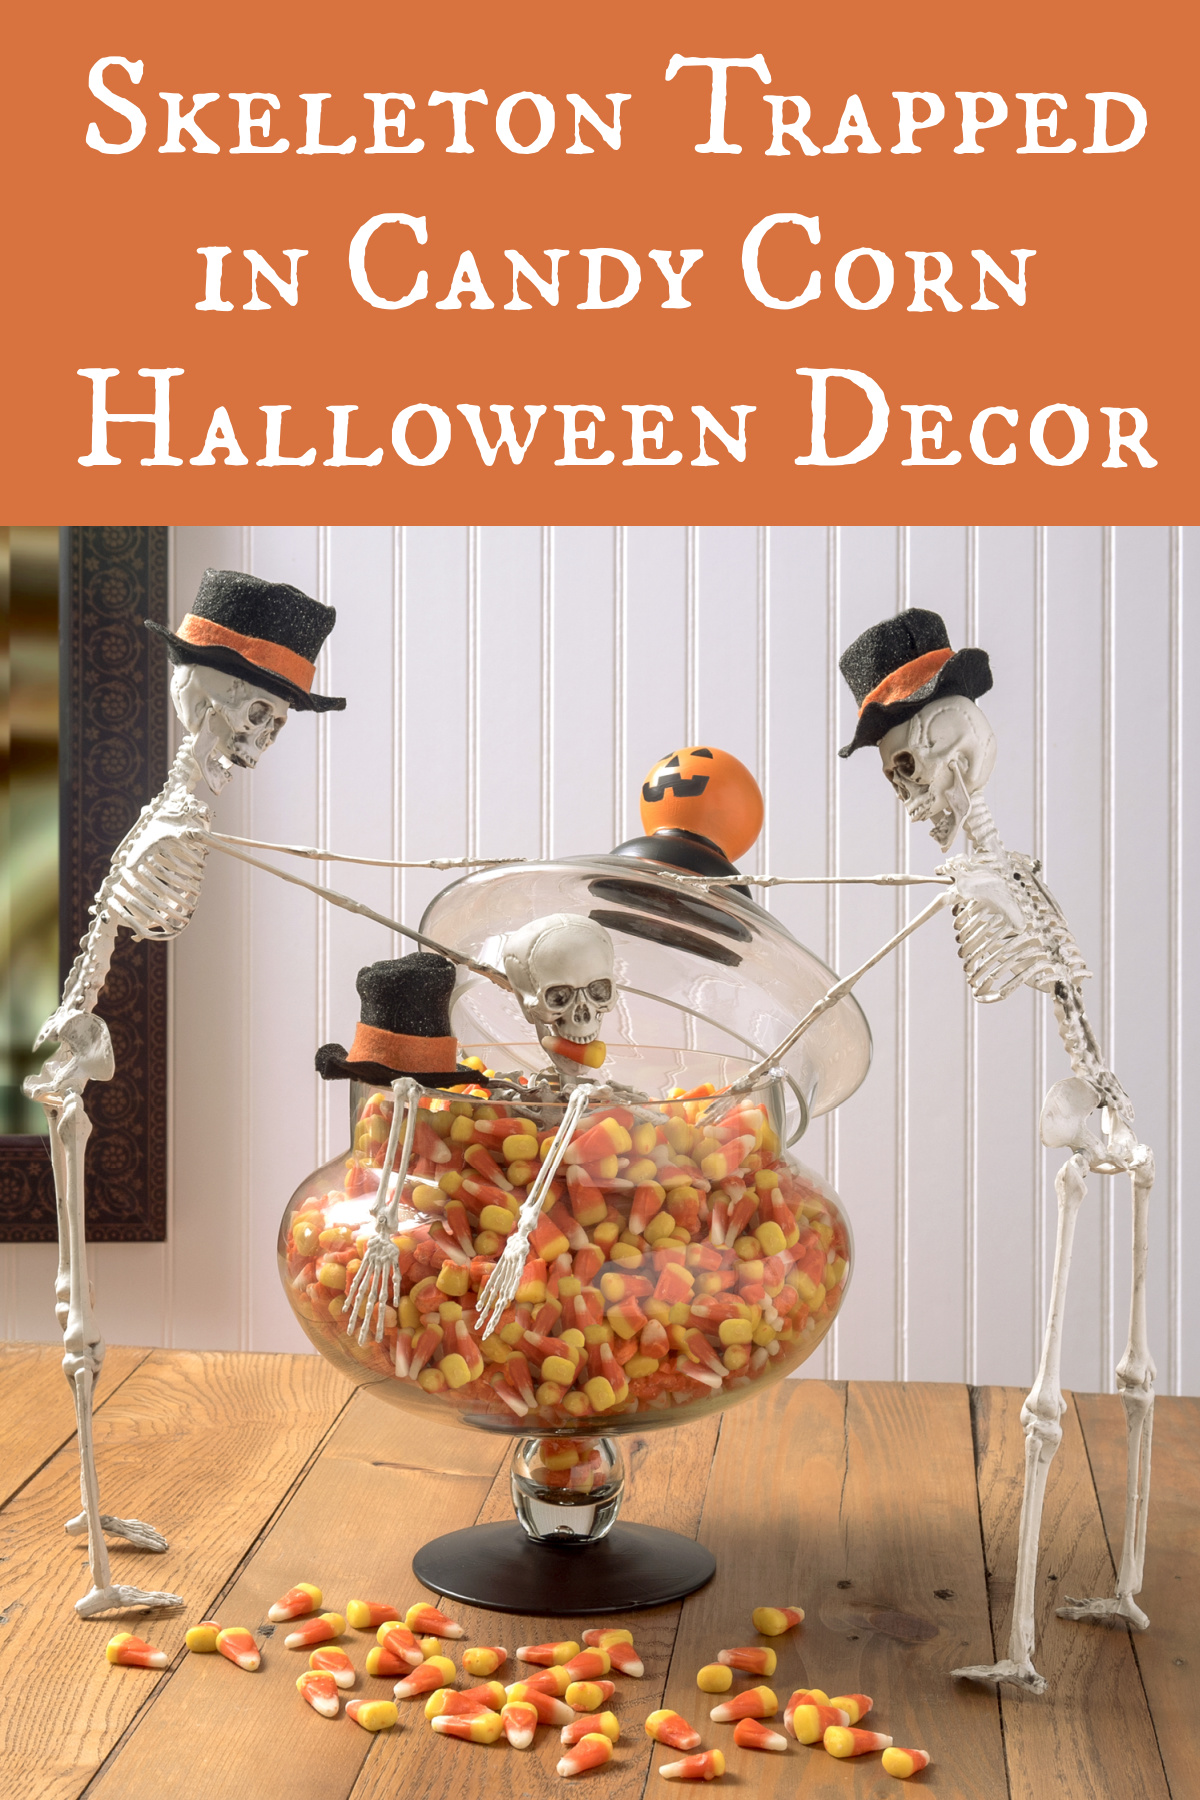 Skeleton Trapped in Candy Corn Halloween Decor